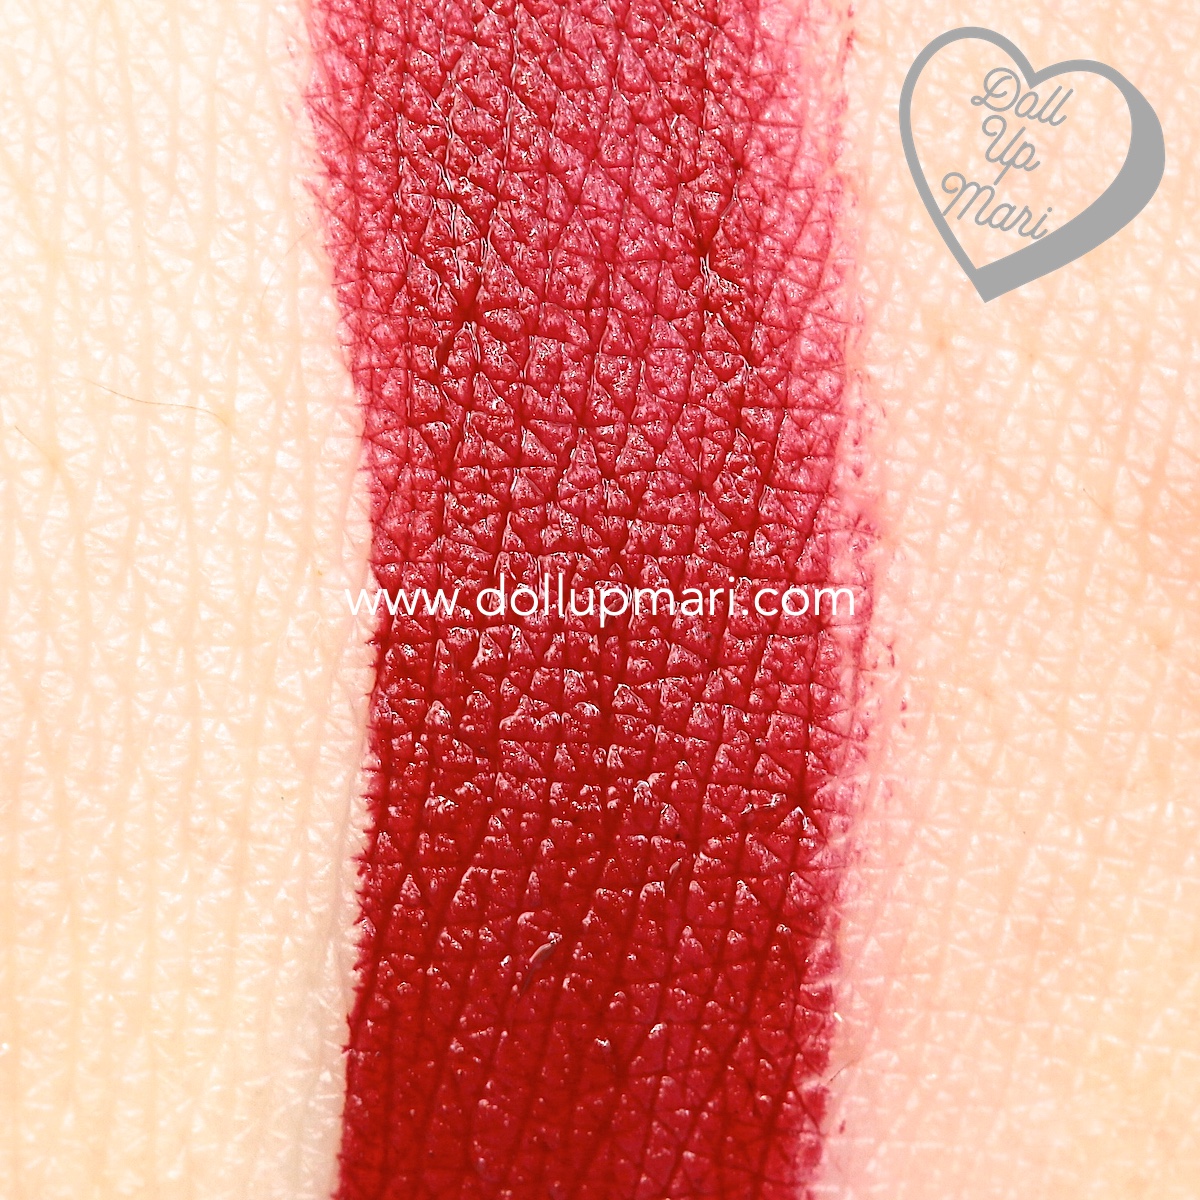 swatch of 310 Achiever shade of Maybelline Superstay Matte Ink Liquid Lipstick Rogue Reds collection